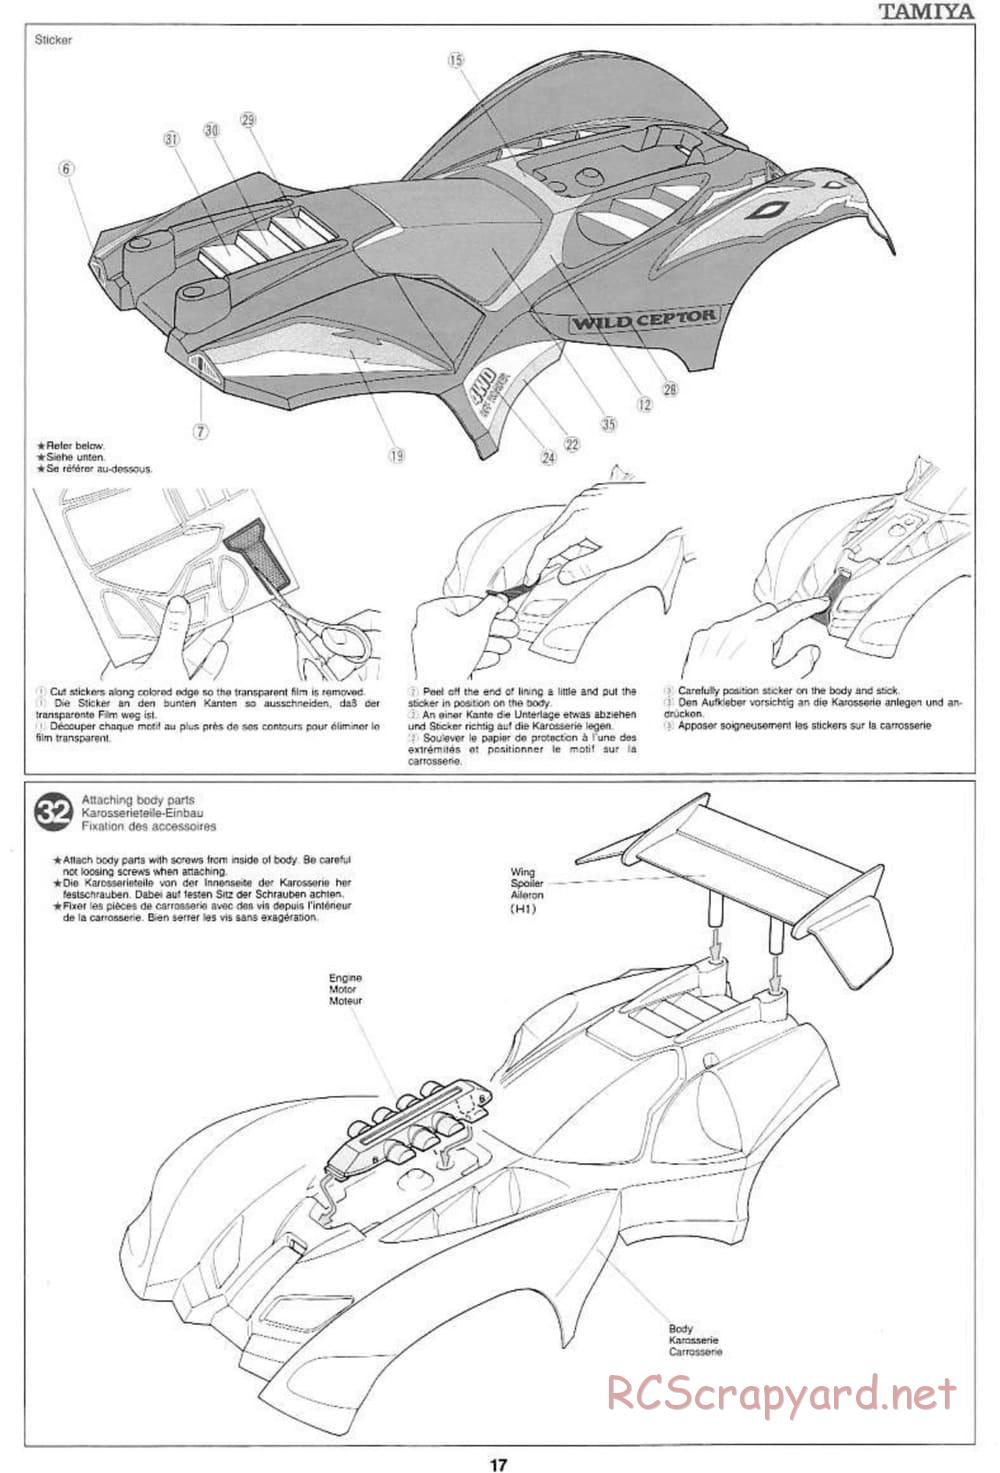 Tamiya - Wild Ceptor - Boy's 4WD Chassis - Manual - Page 17